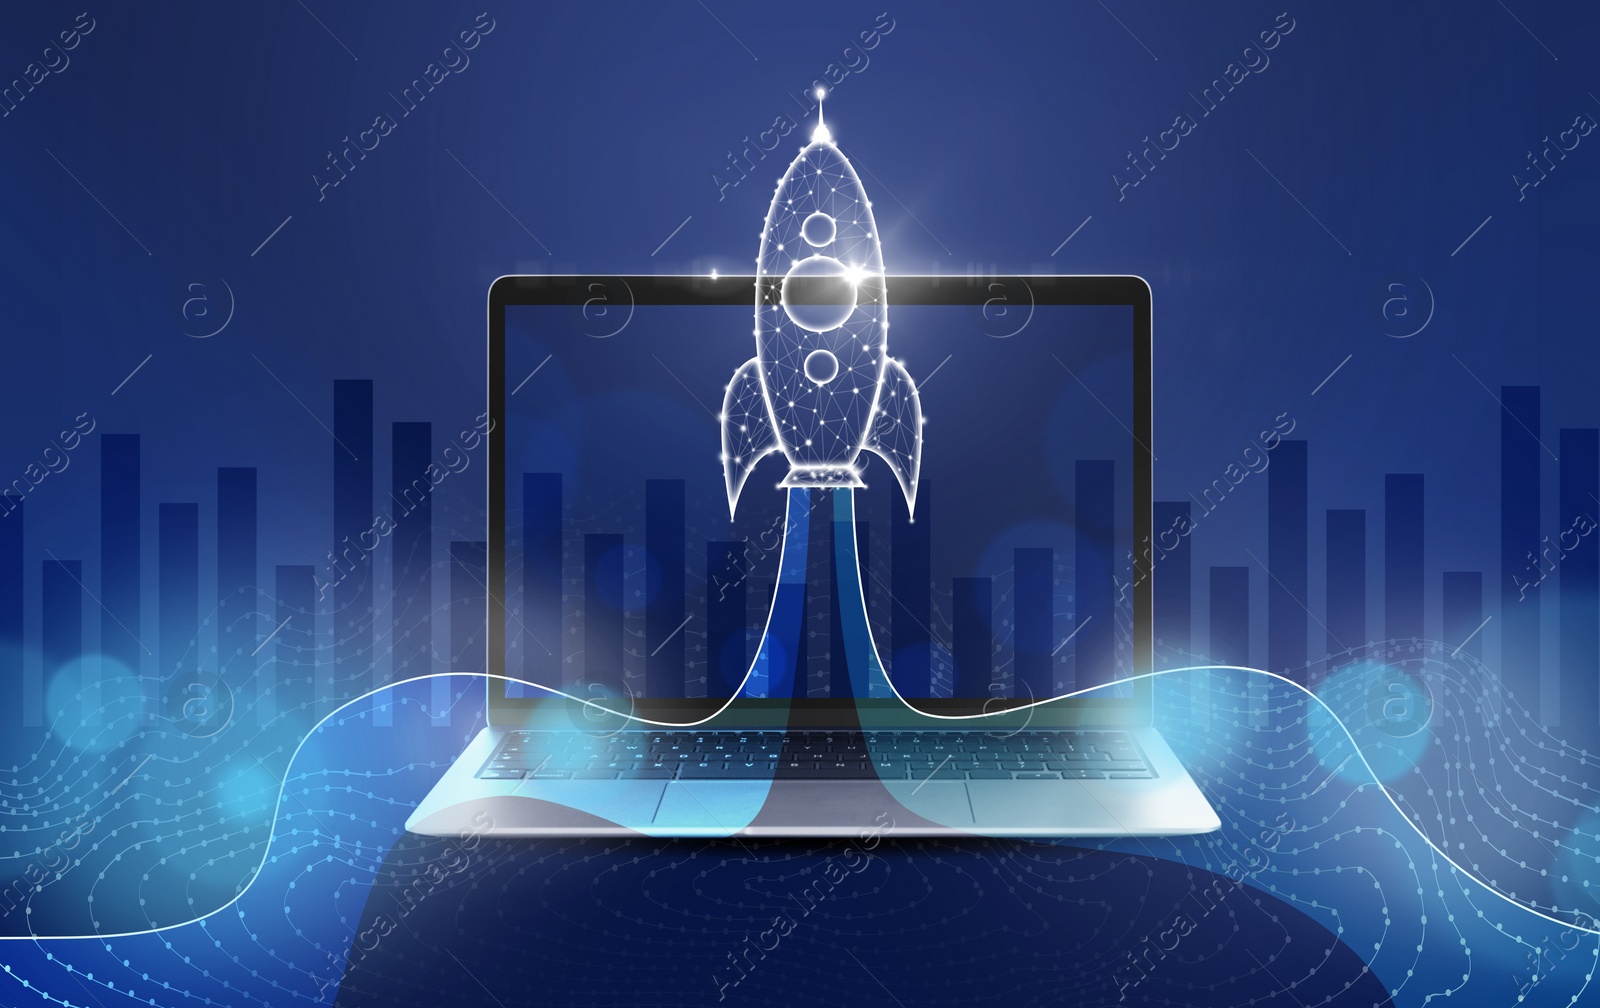 Image of Business startup concept. Illustration of launching rocket with smoke over laptop and graph against blue background